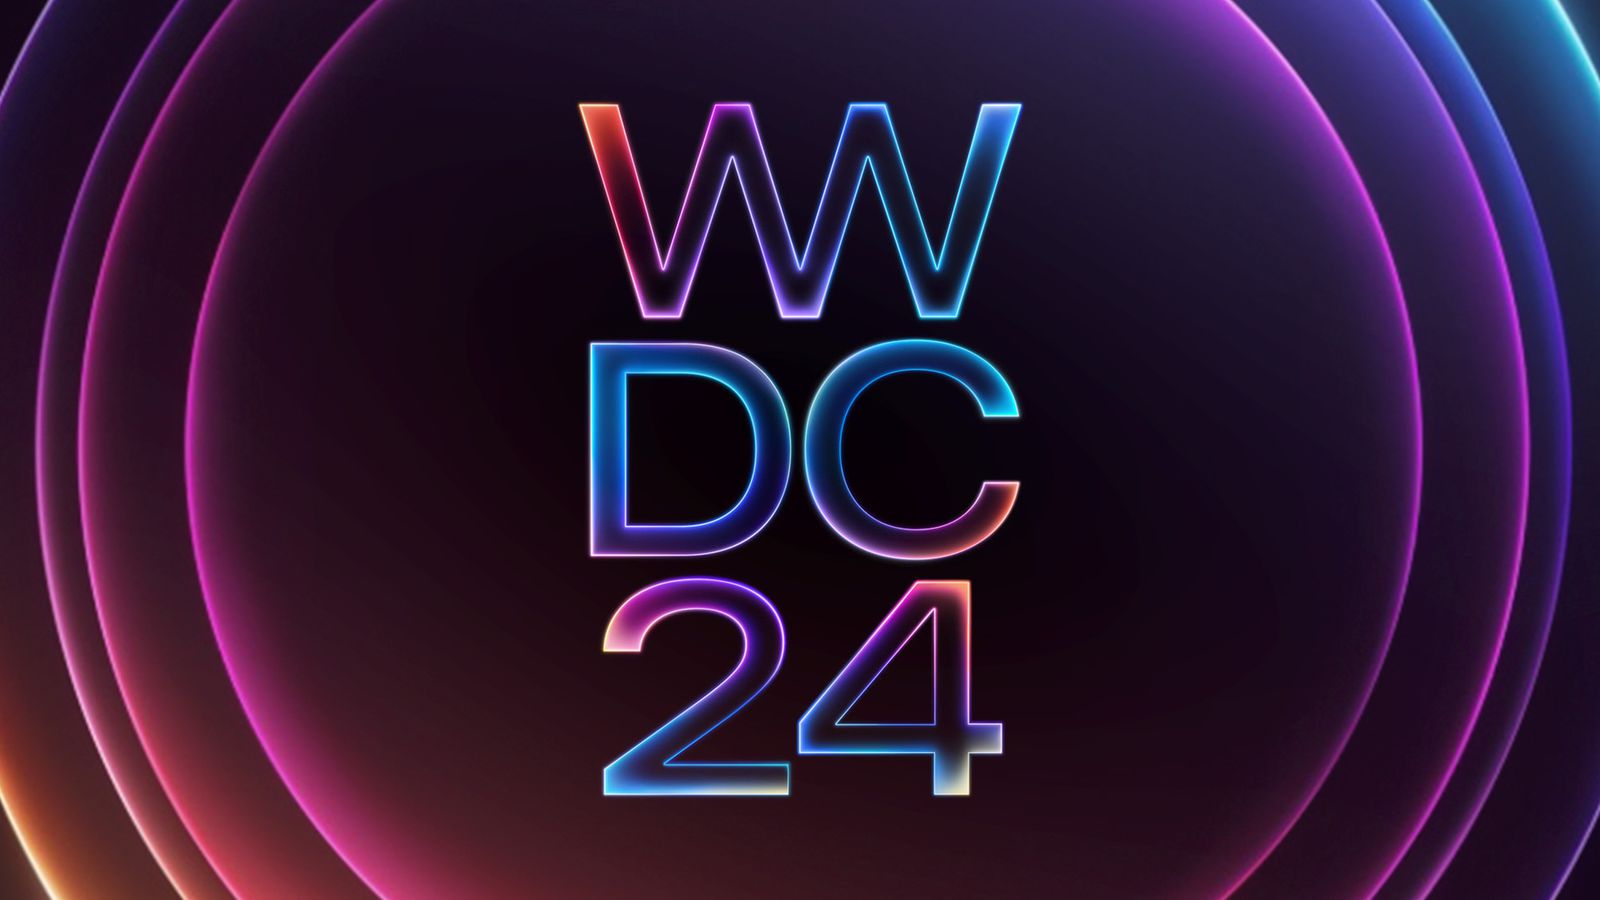 Exciting Updates Await: WWDC 2024 Set for June 10-14